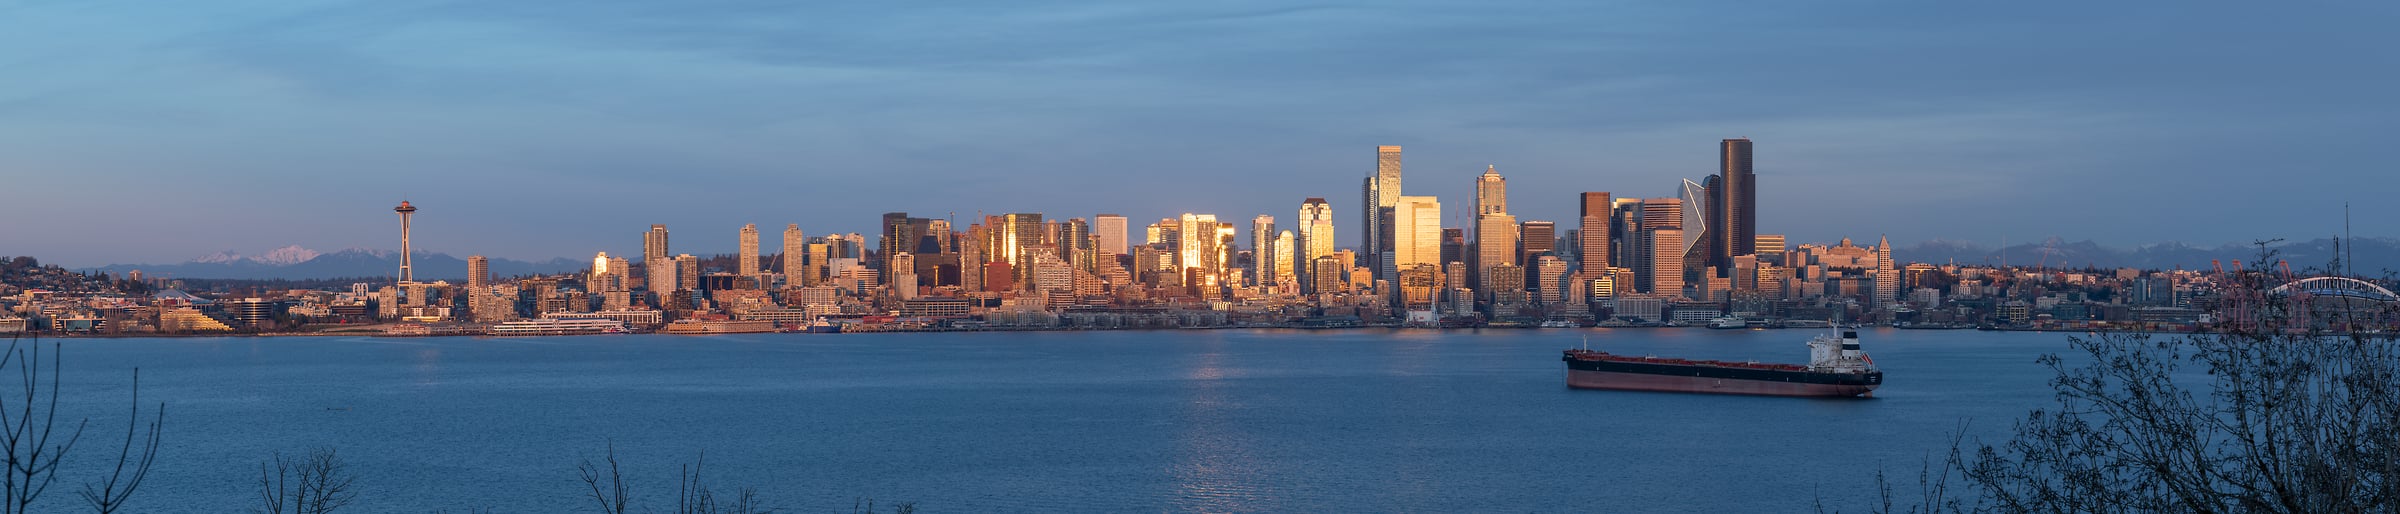 193 megapixels! A very high resolution, large-format panorama photo of the Seattle skyline at sunset with Elliott Bay in the foreground; cityscape photograph created by Greg Probst in Seattle, Washington.